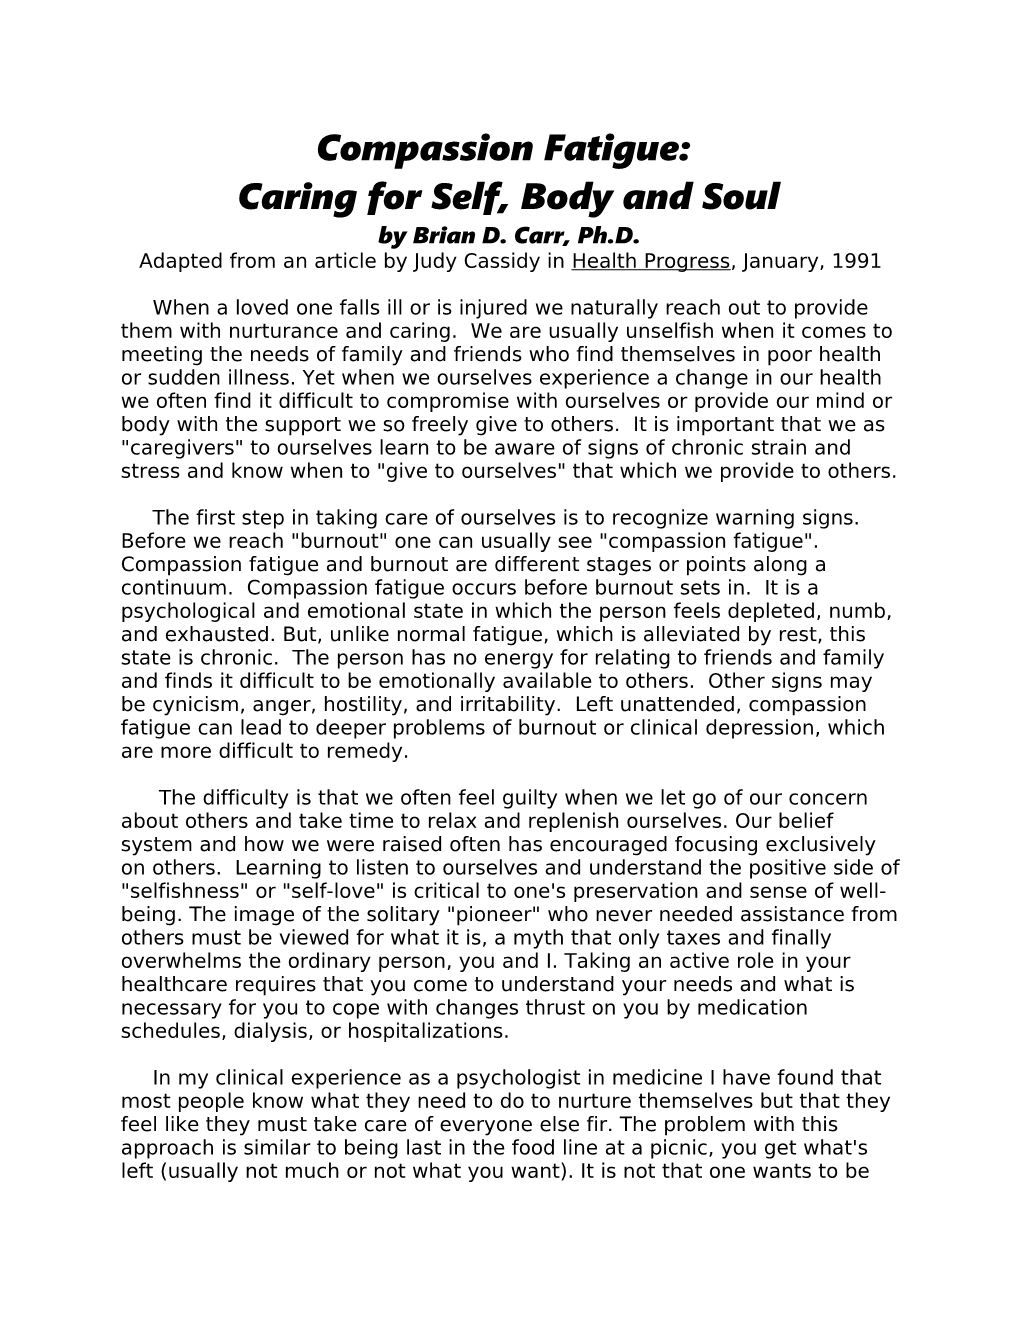 Caring for Self, Body and Soul